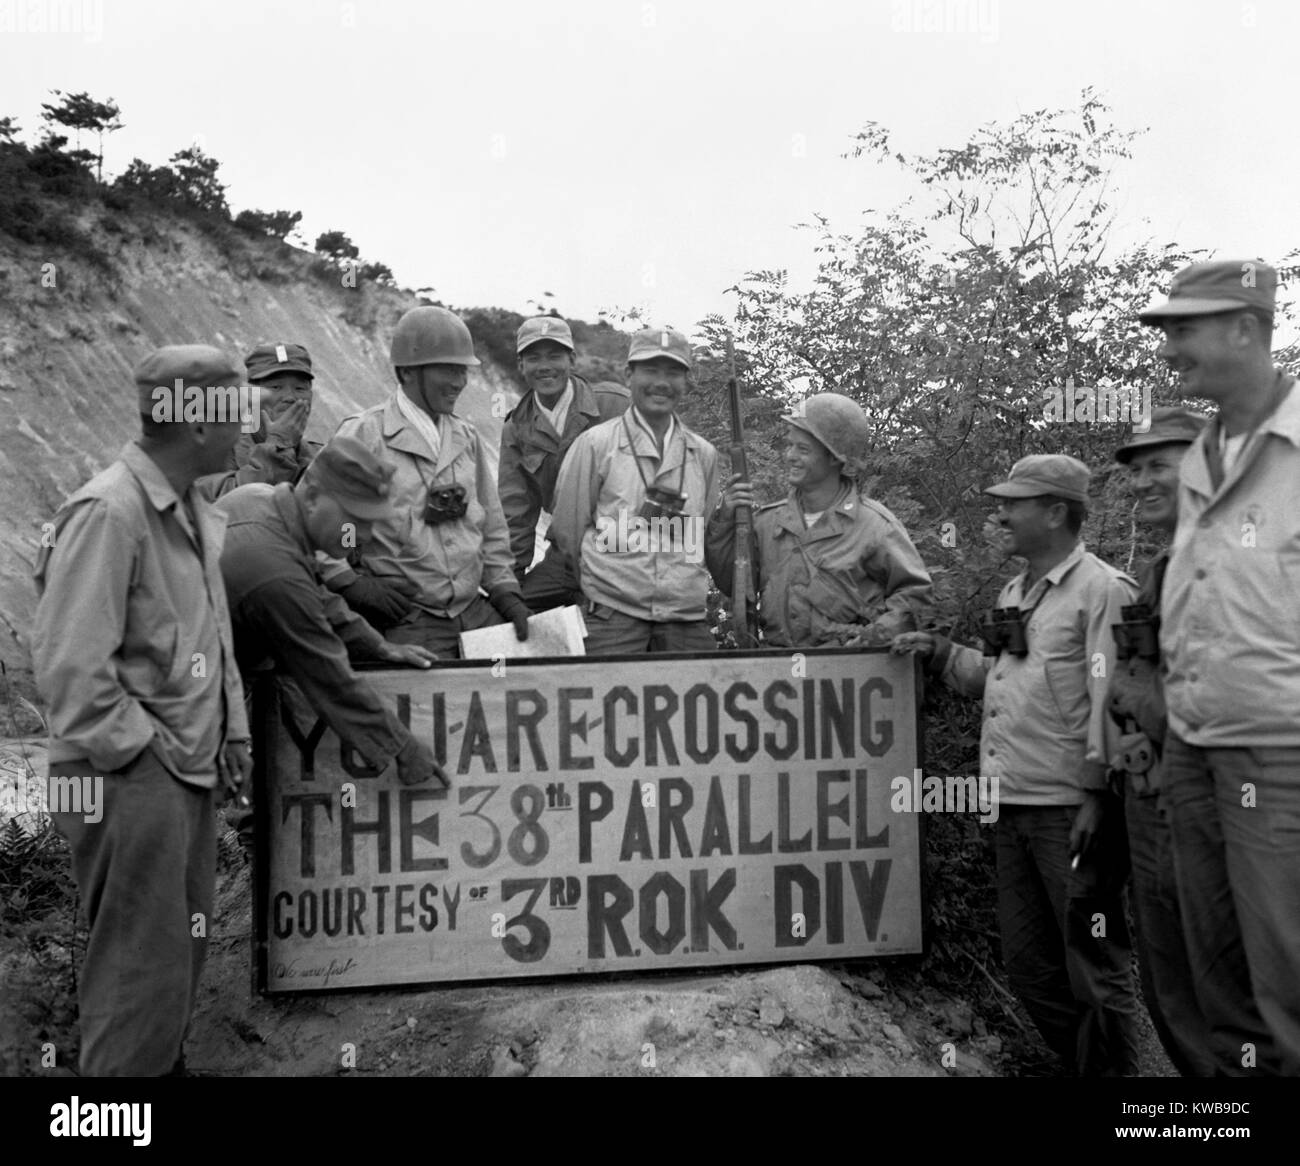 First UN troops to cross the 38th Parallel hold a sign posting ceremony. The 3rd ROK (Republic of Korea) Division made the historic crossing, in Korea. ROK soldiers pose with their U.S. Military advisors. Oct. 1, 1950. Korean War, 1950-53. (BSLOC 2014 11 63) Stock Photo